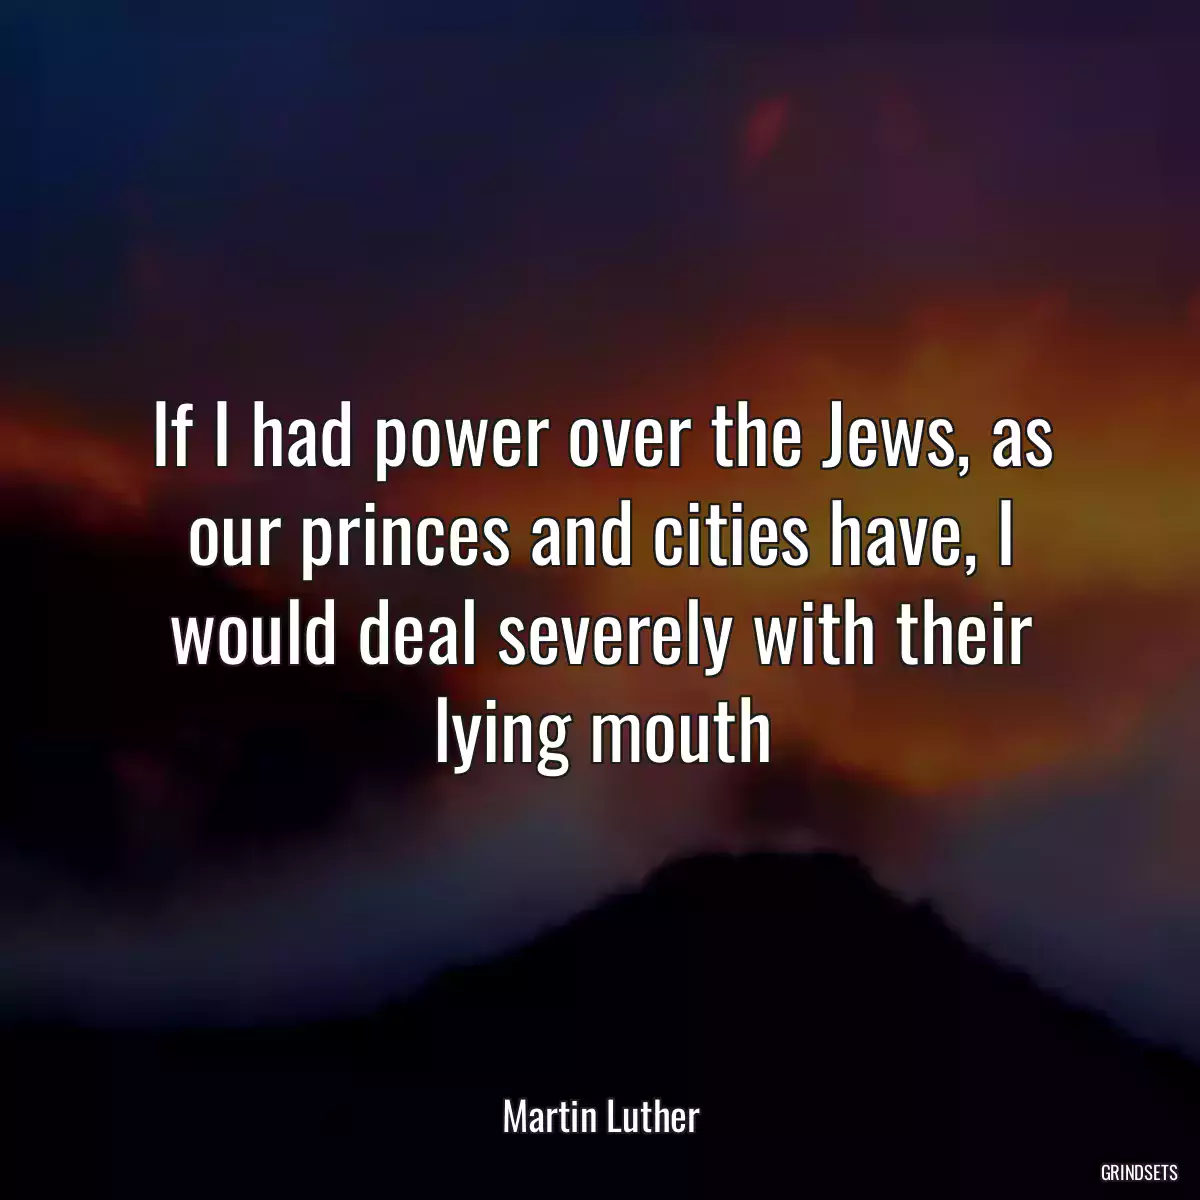 If I had power over the Jews, as our princes and cities have, I would deal severely with their lying mouth